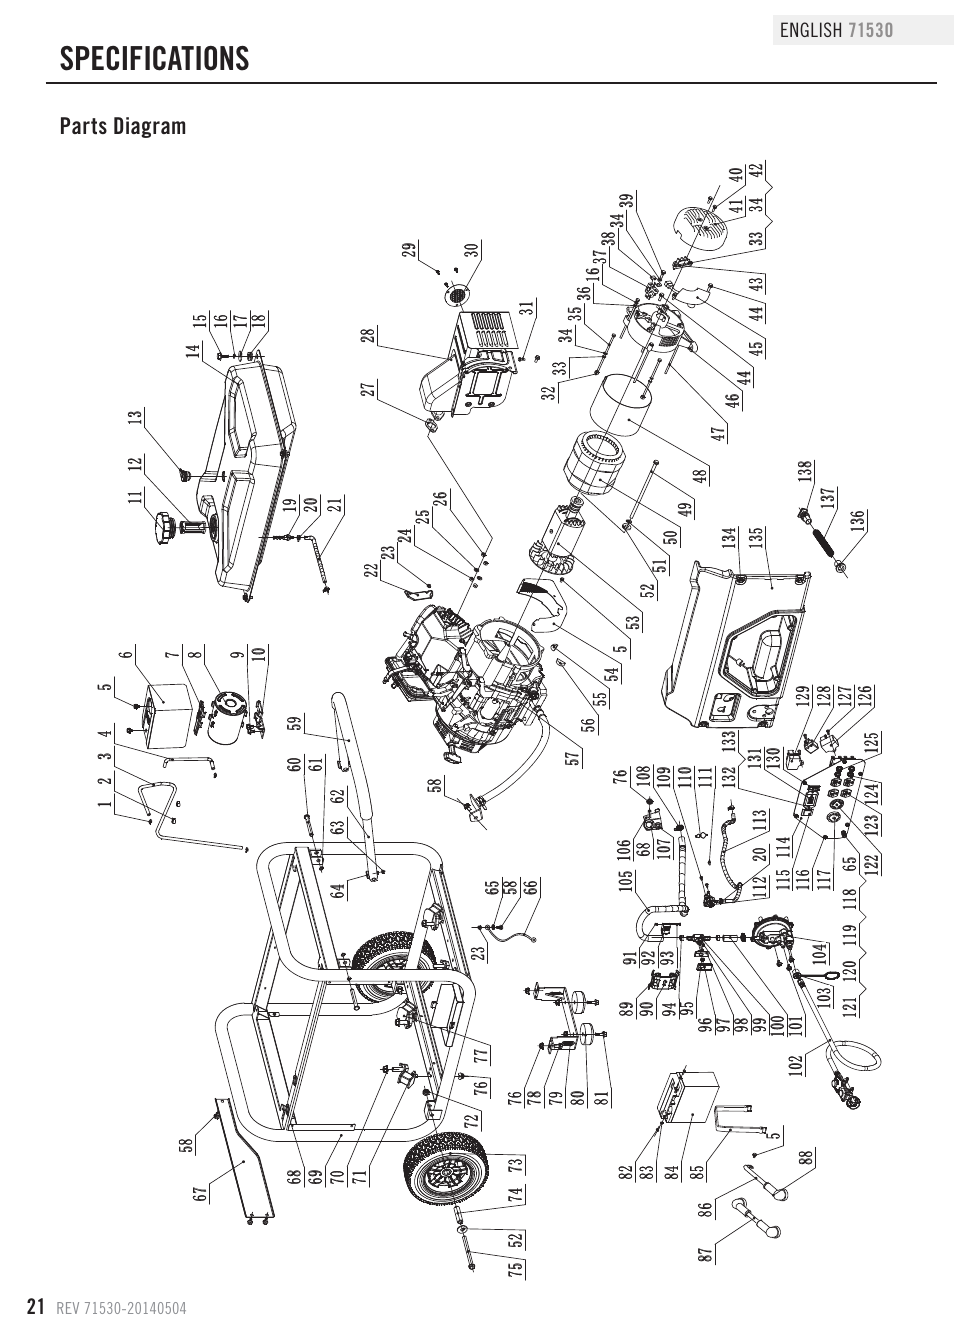 Specifications, Parts diagram | Champion Power Equipment 71530 User